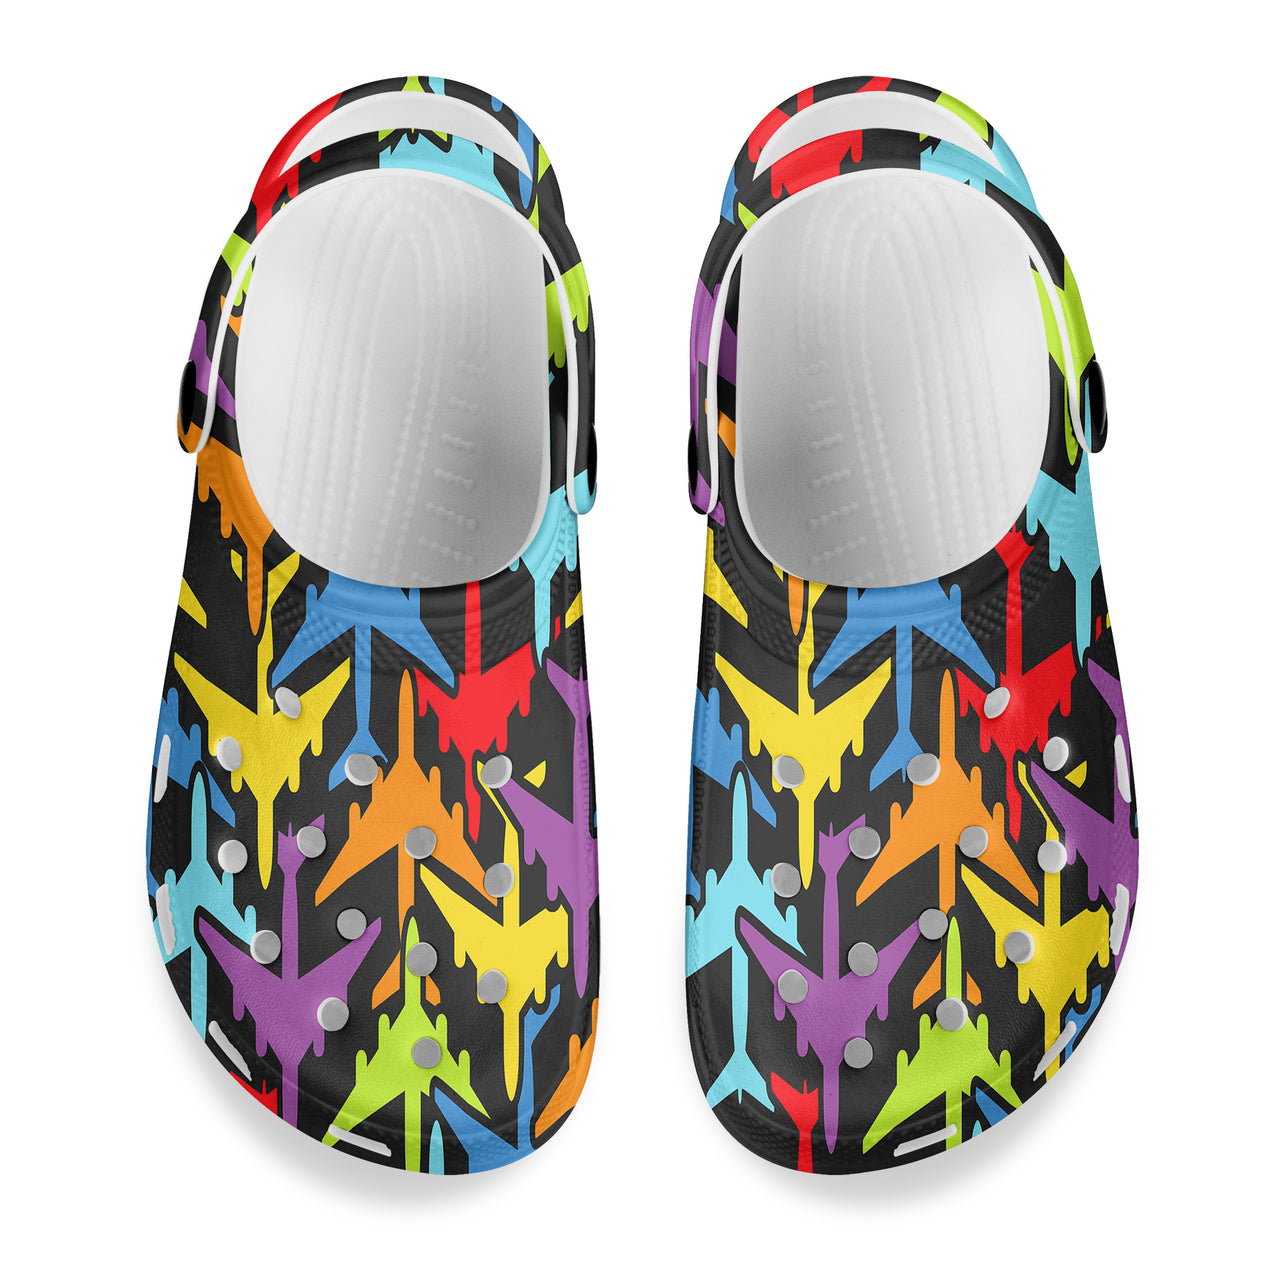 Super Colourful Airplanes Designed Hole Shoes & Slippers (MEN)